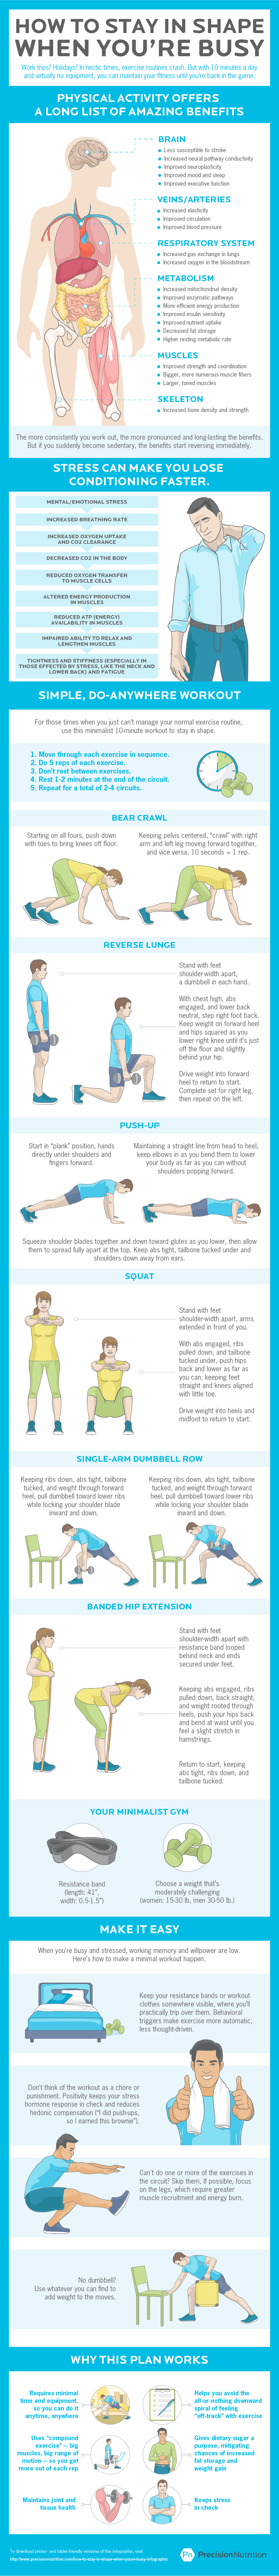 How to stay in shape when you’re busy. [Infographic]